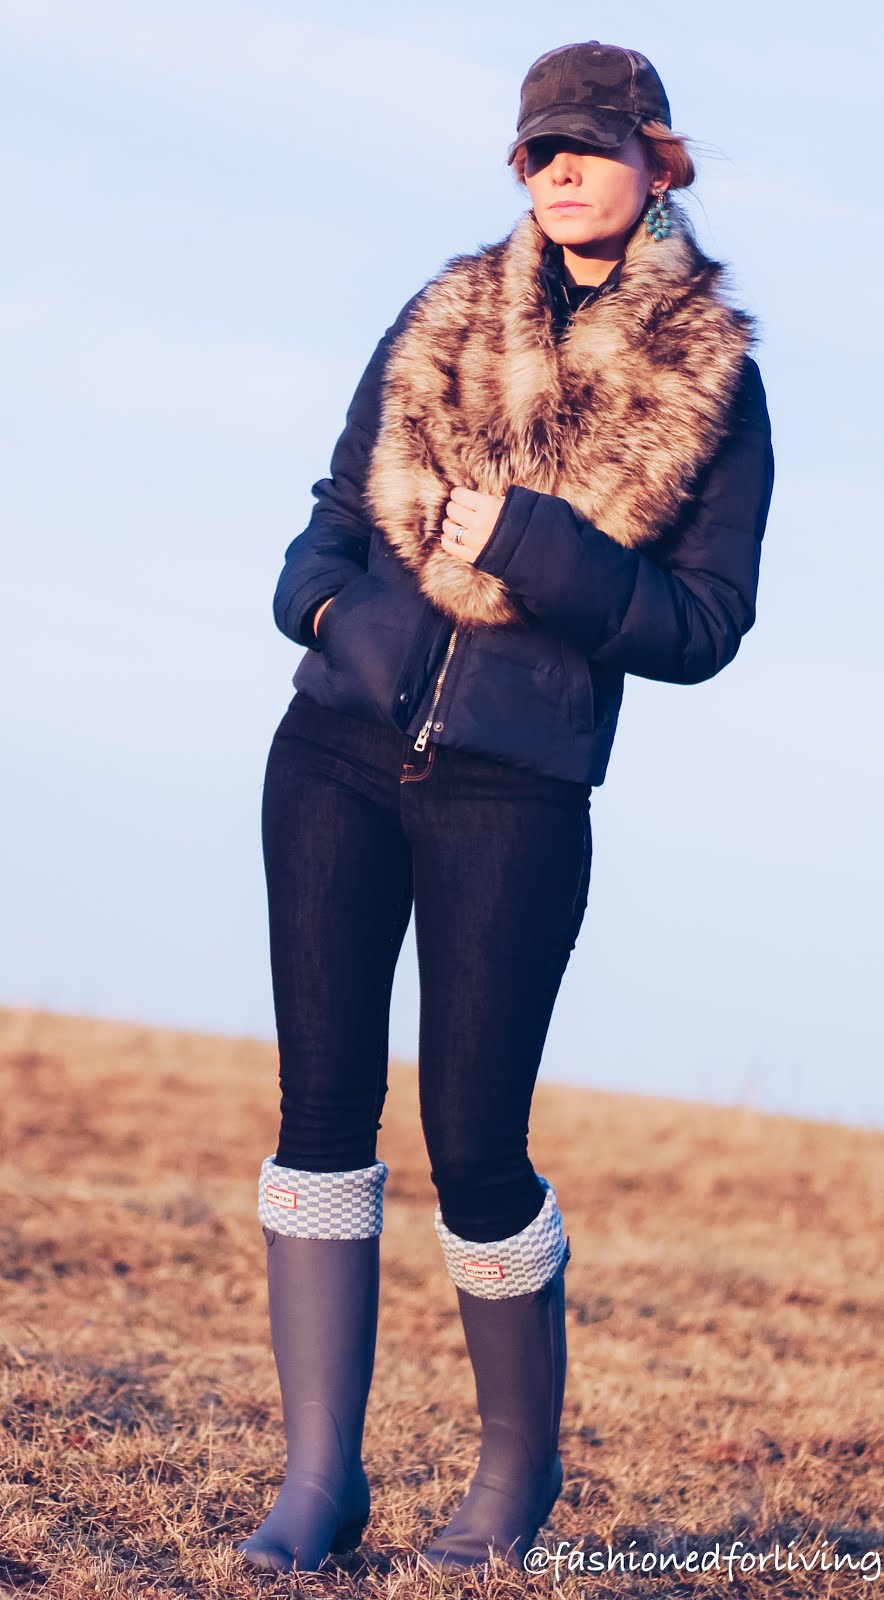 Fashioned For Living: hunter boots outfit with faux fur, high waisted